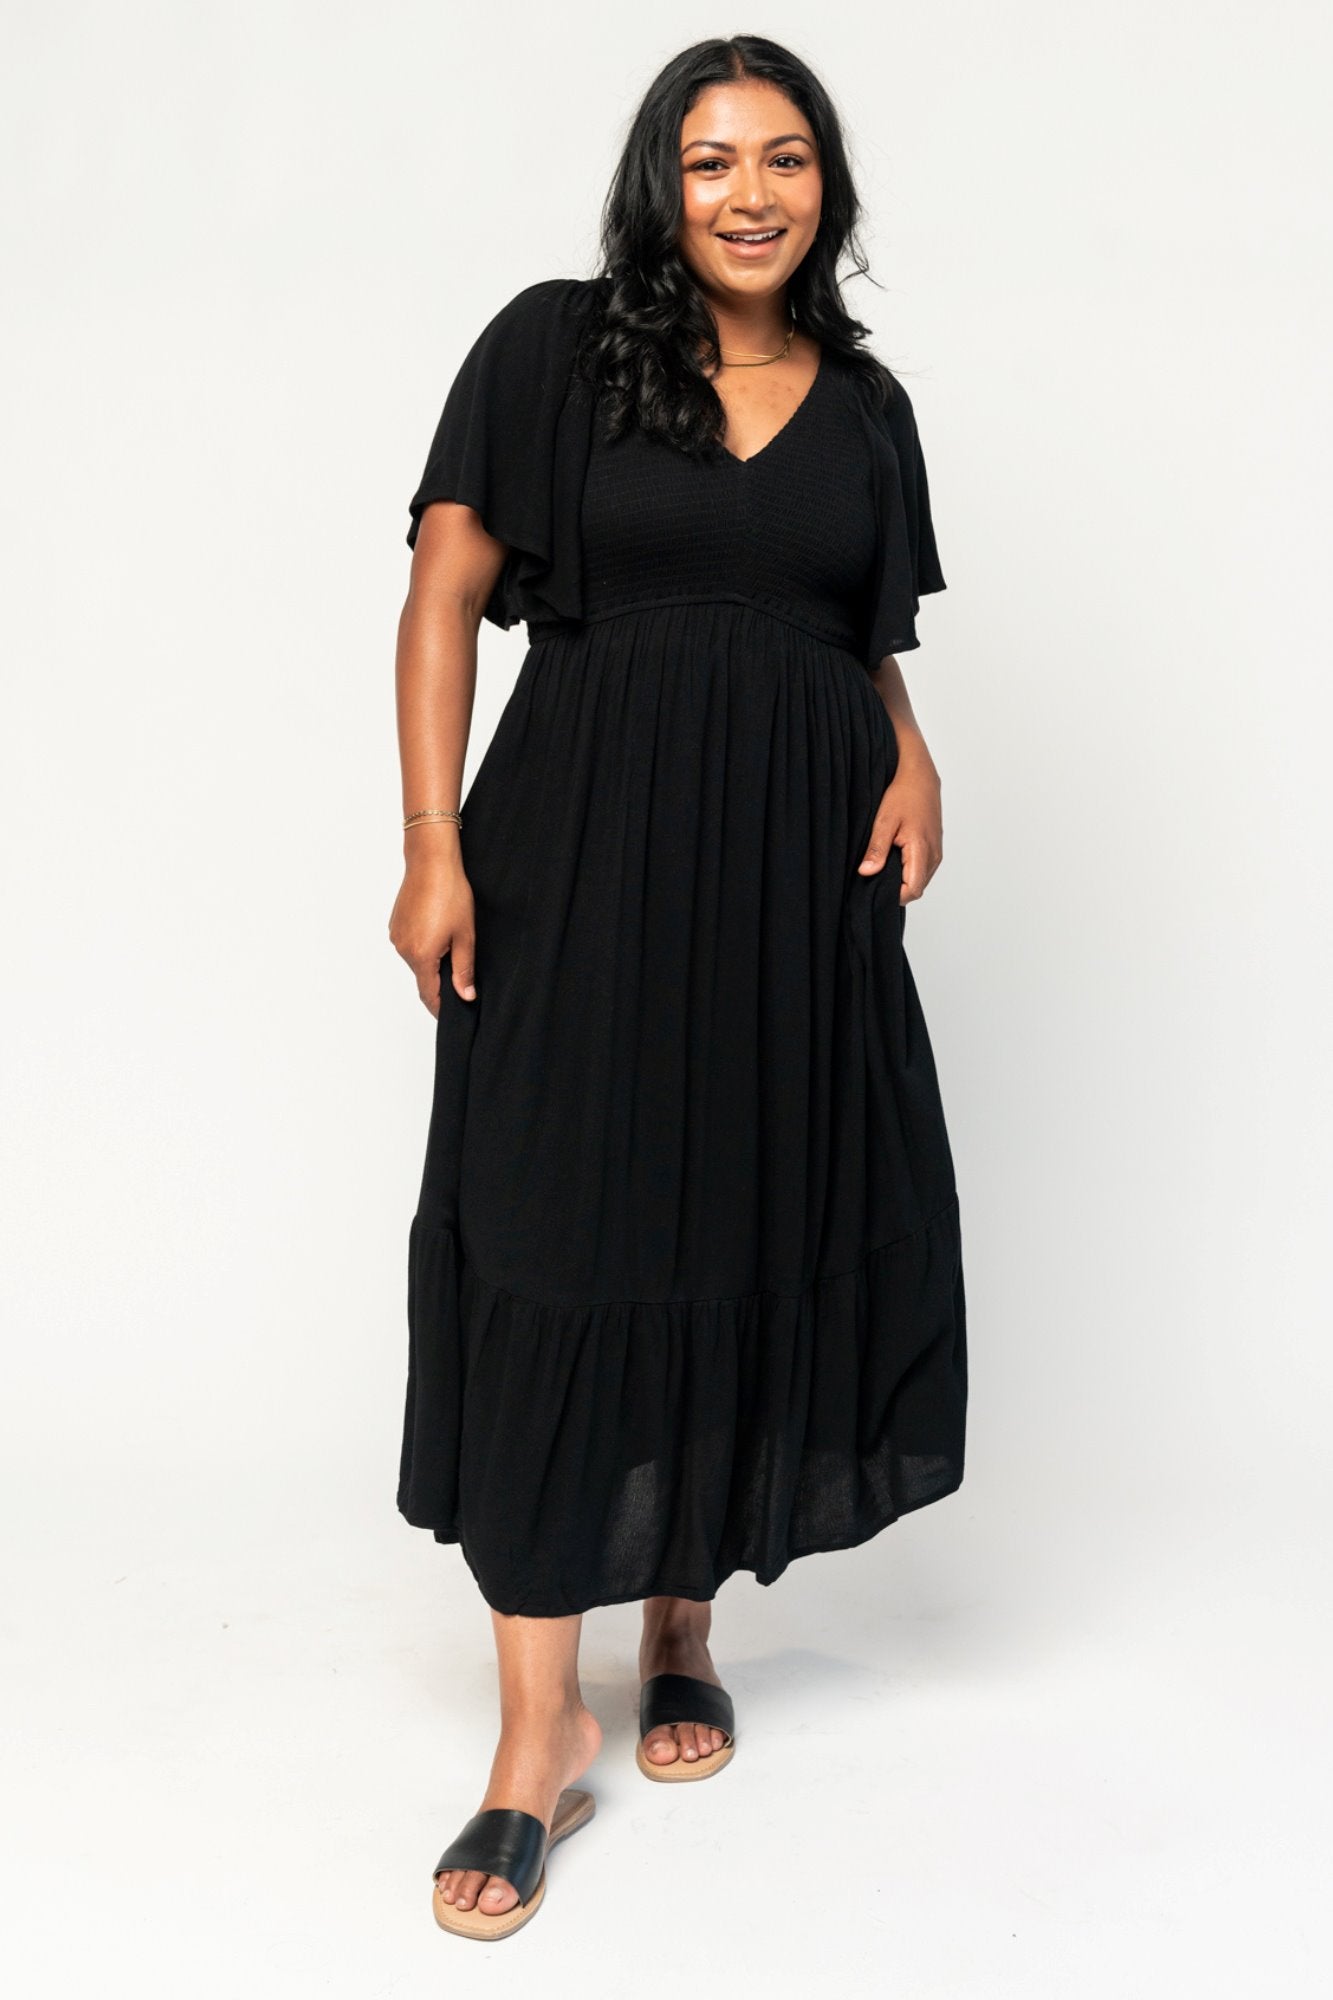 HOLLEY GIRL EXCLUSIVE - Sofia Dress in Black (Small-3XL) - FINAL SALE ...